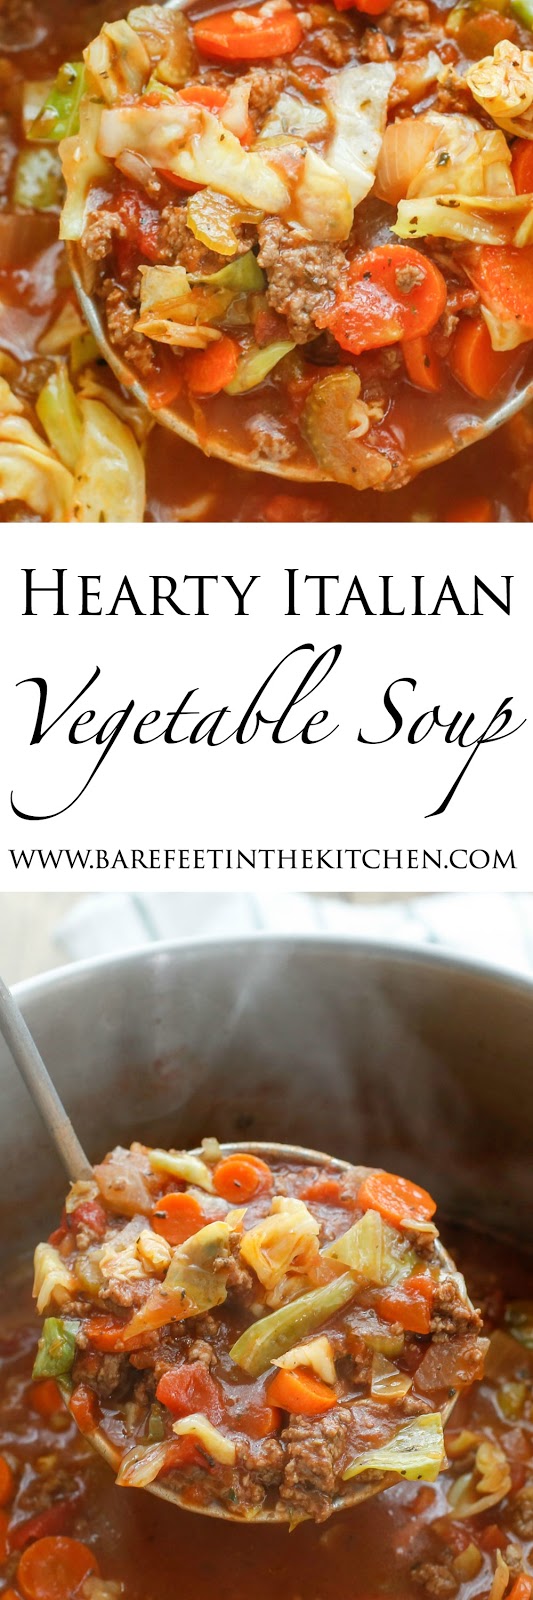 Barefeet In The Kitchen: Hearty Italian Vegetable Beef Soup